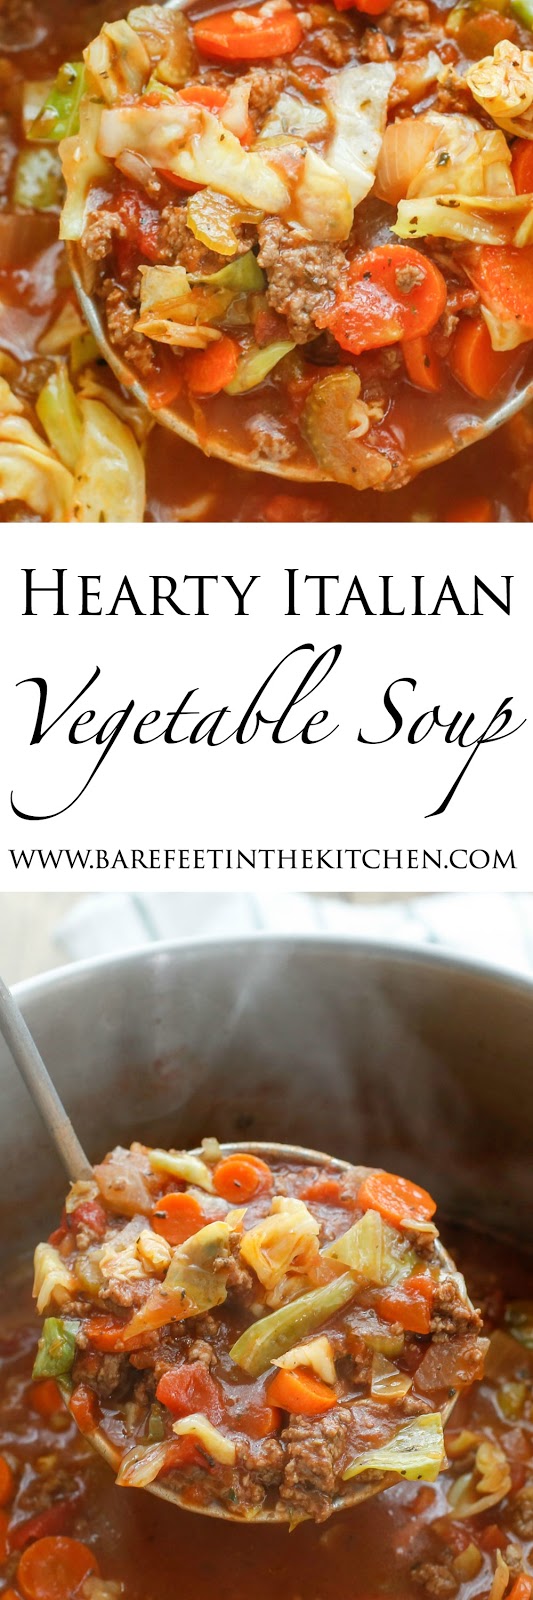 Barefeet In The Kitchen: Hearty Italian Vegetable Beef Soup